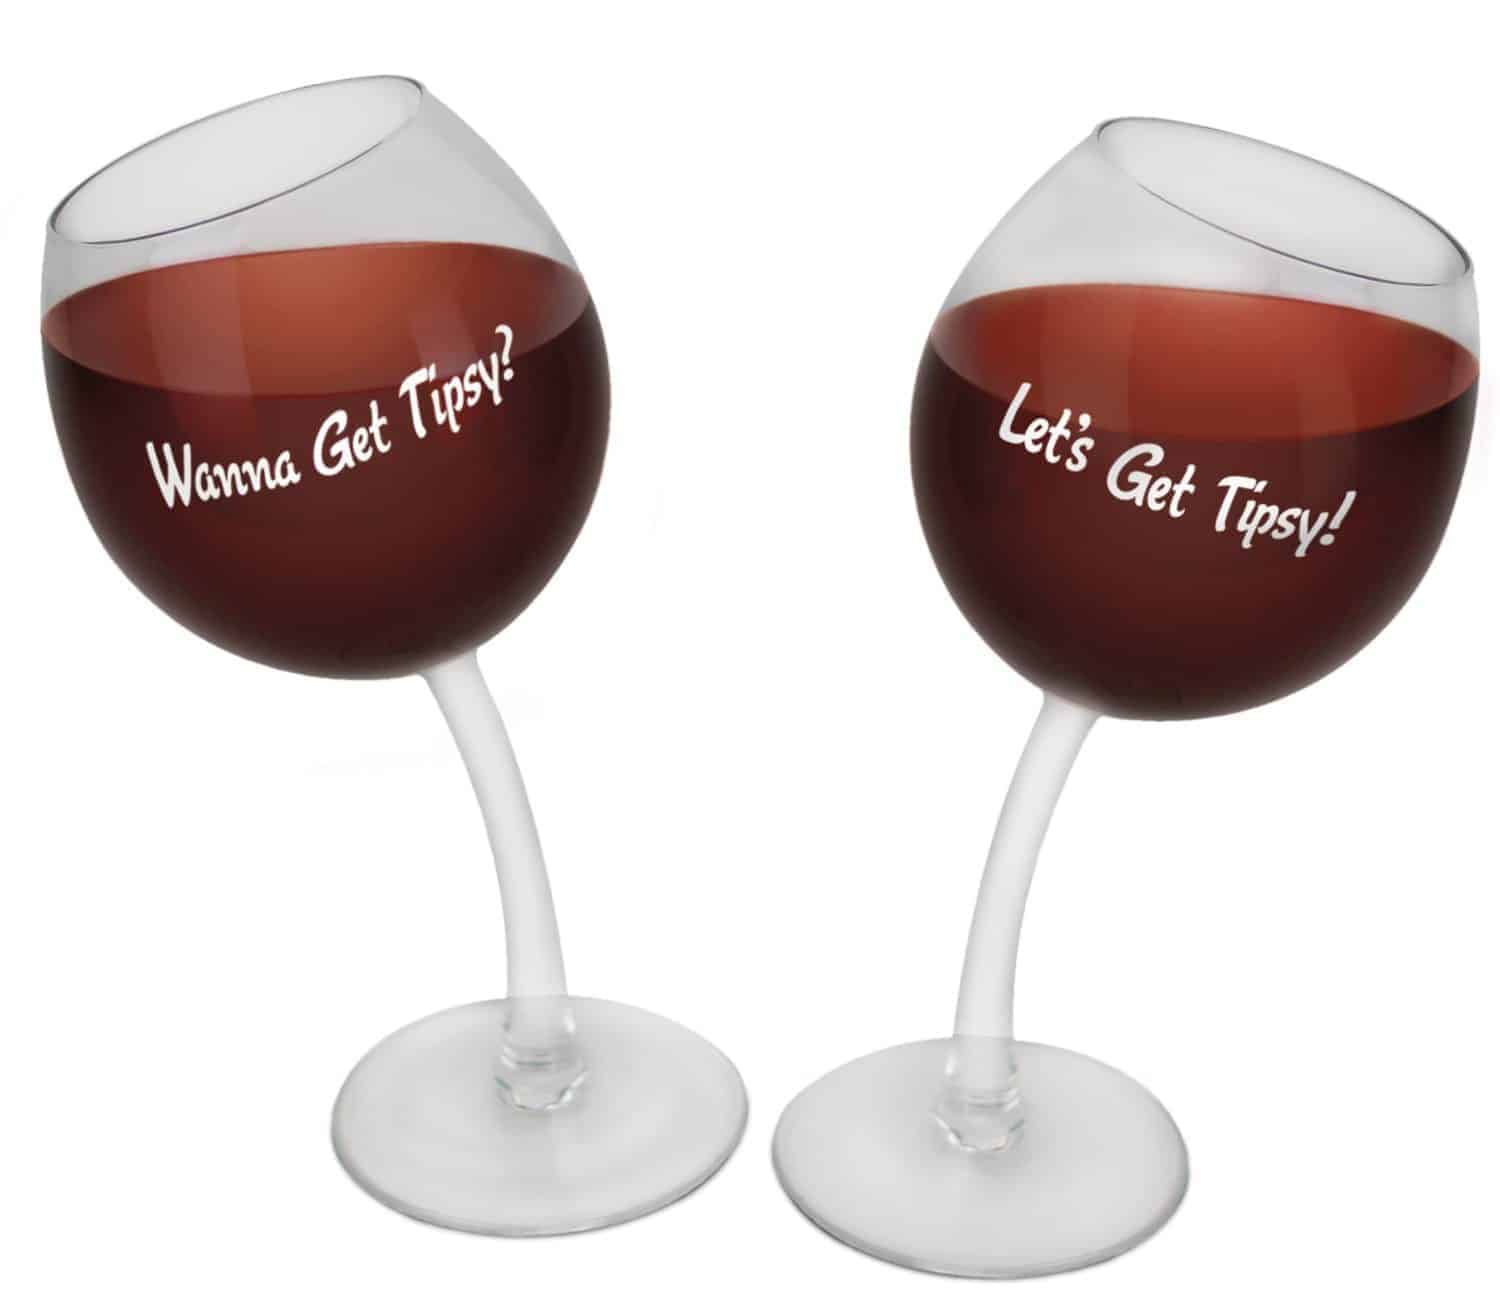 13 Funny Wine Glasses You Have to Get - Wine Turtle